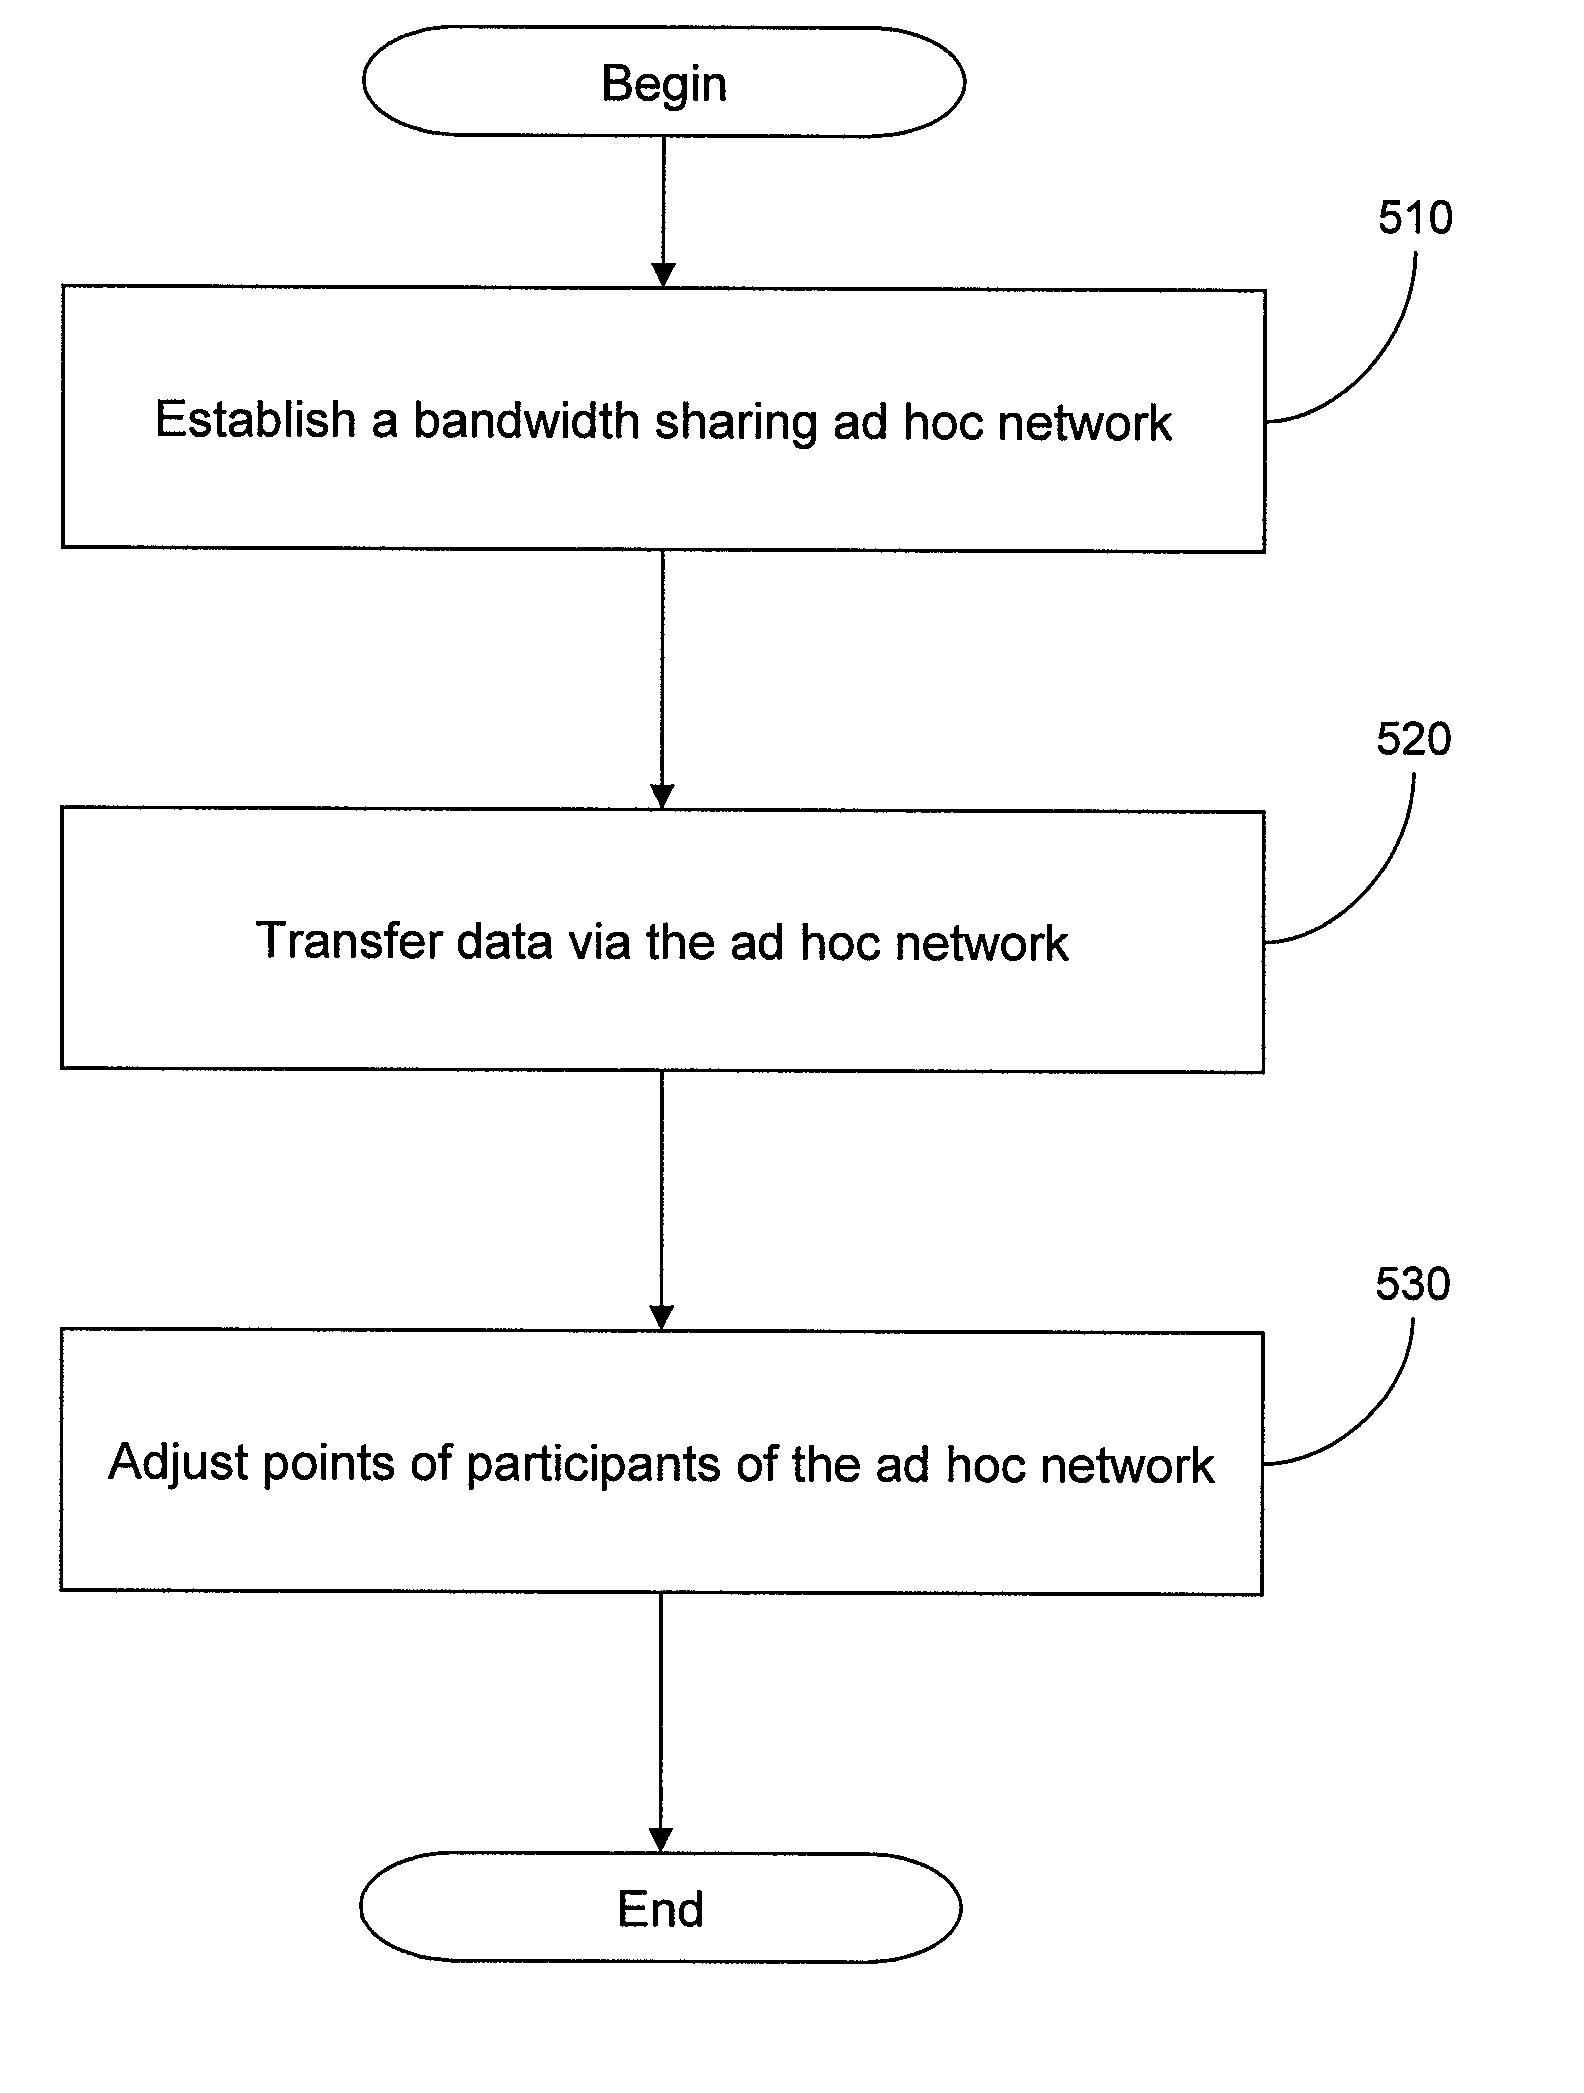 System and method for fair-sharing in bandwidth sharing ad-hoc networks